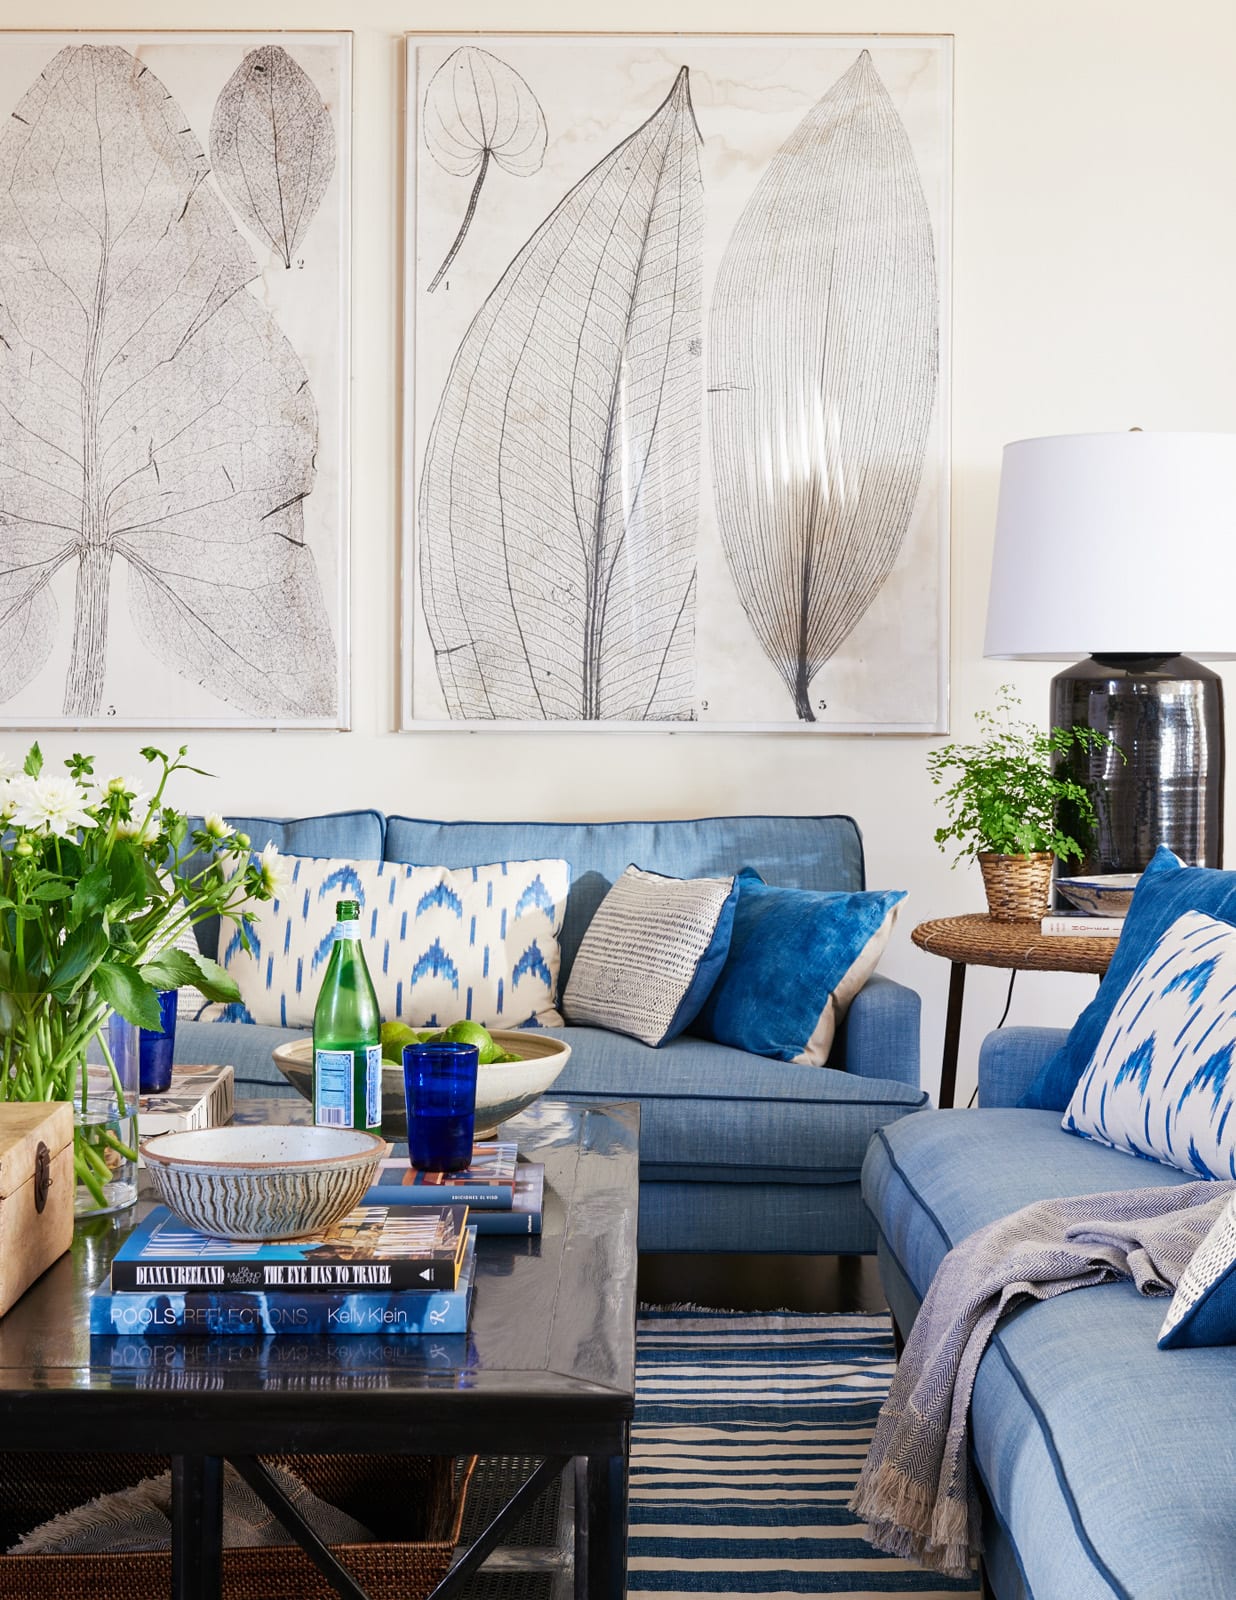 10 Favorites in Blue & White with the fabulous Mark D. Sikes - Amy Neunsinger Photography - living room - living room design - living room decor